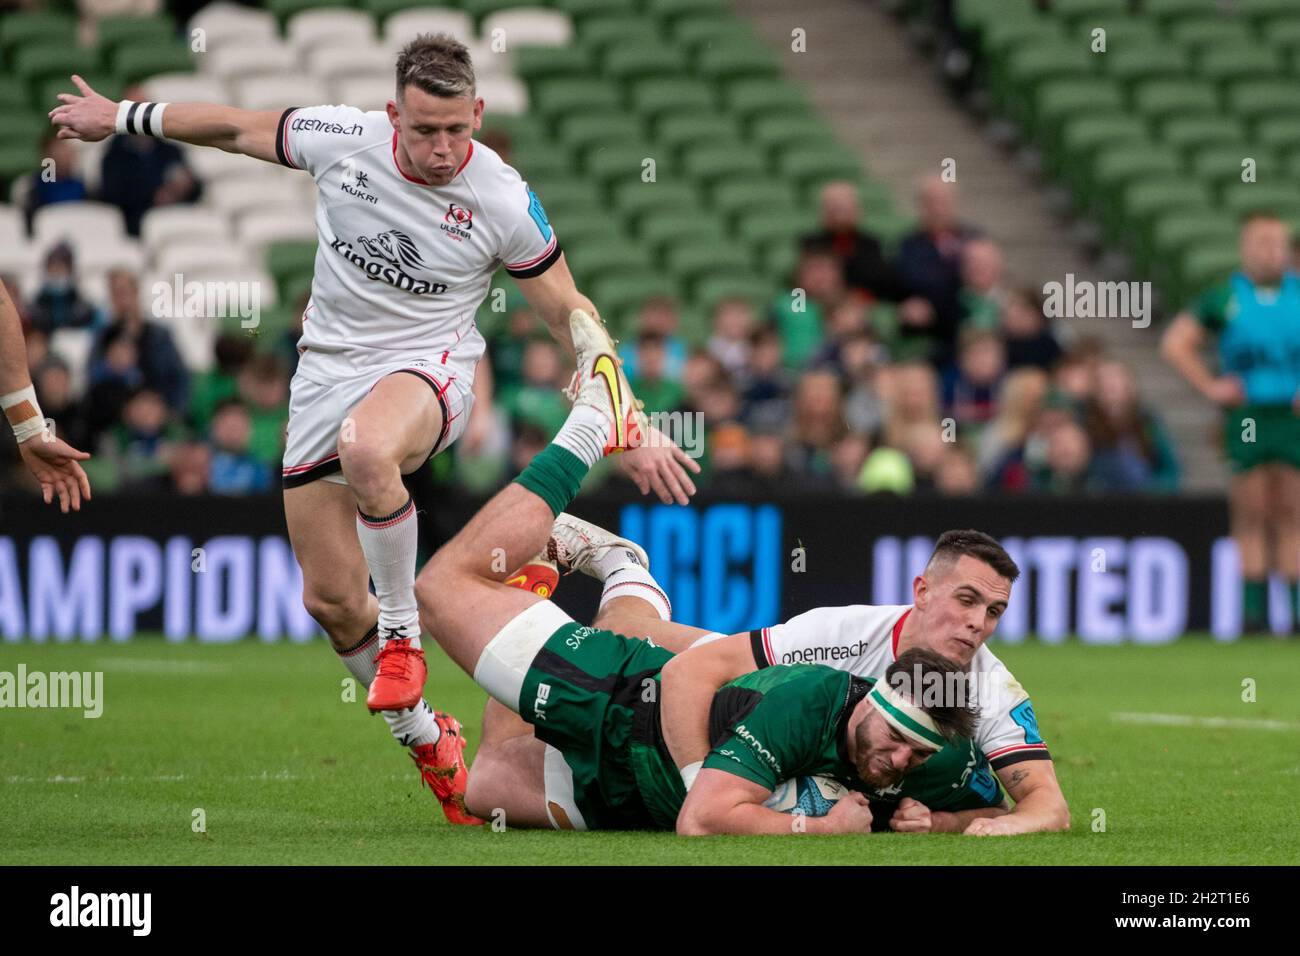 Tom DALY of Connacht tackled by James HUME of Ulster during the United Rugby Championship Round 5 match between Connacht Rugby and Ulster Rugby at Aviva Stadium in Dublin, Ireland on October